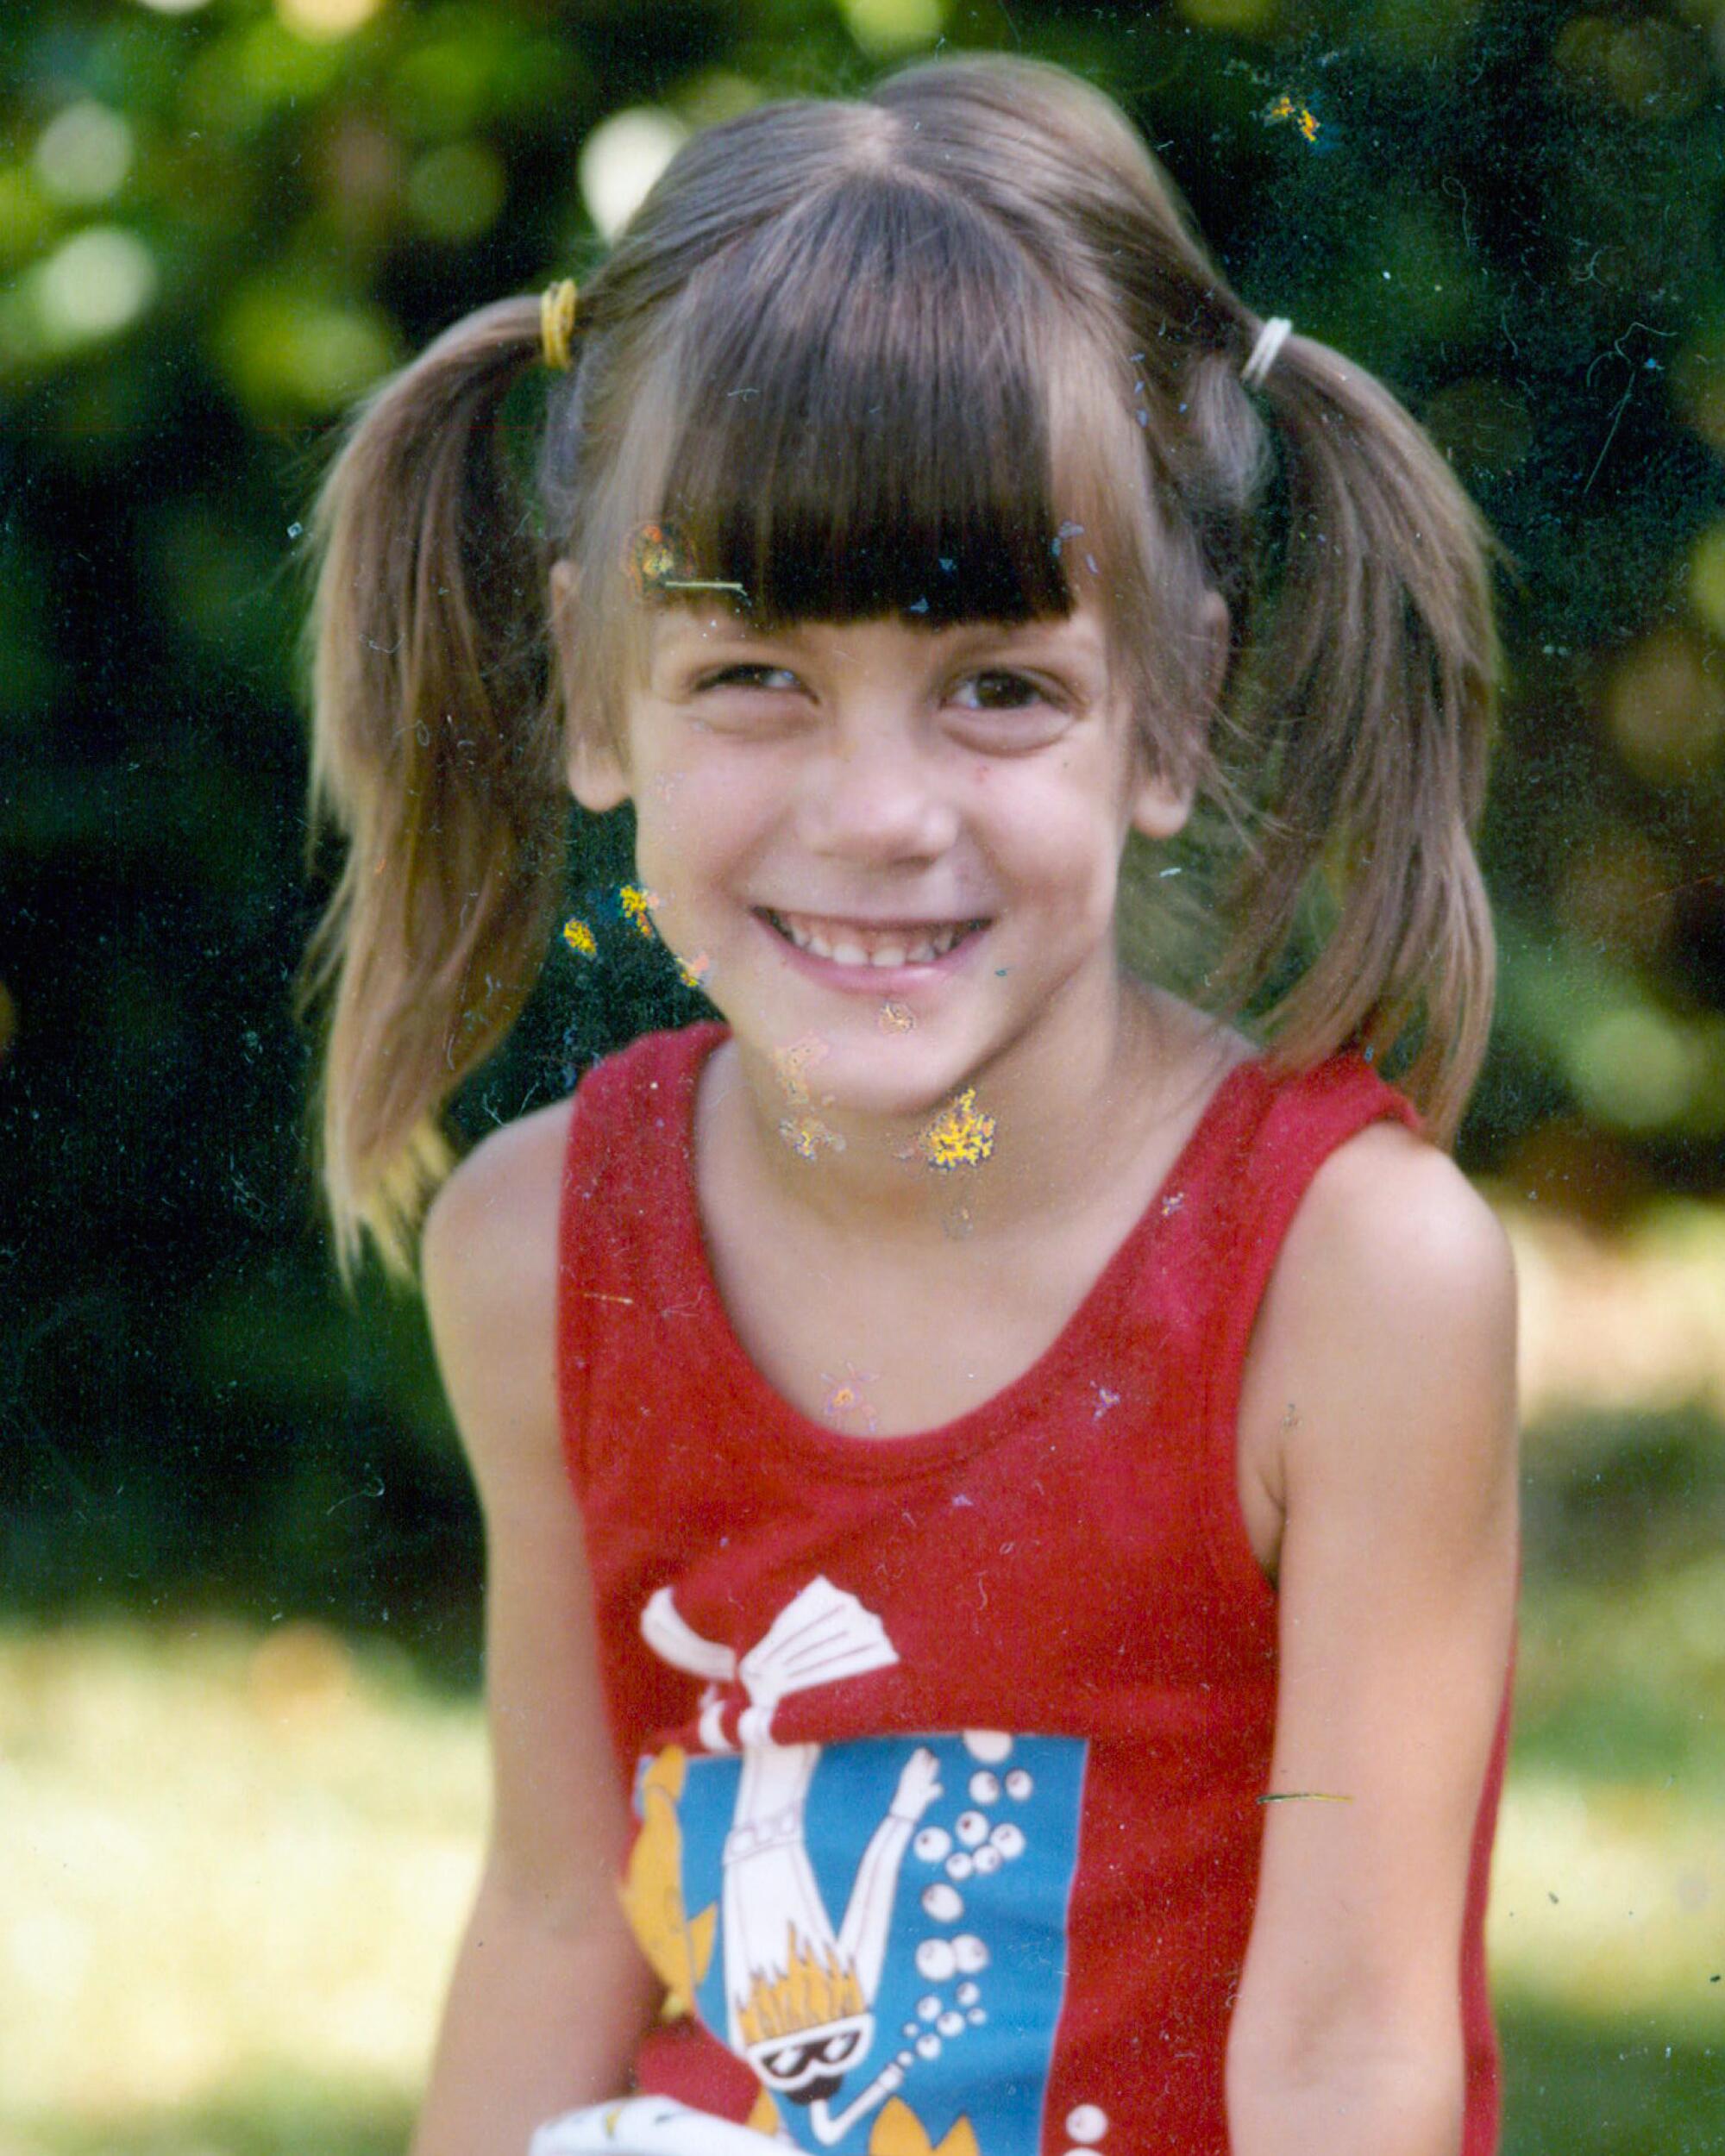 Harrison as a child with her hair in two ponytails.